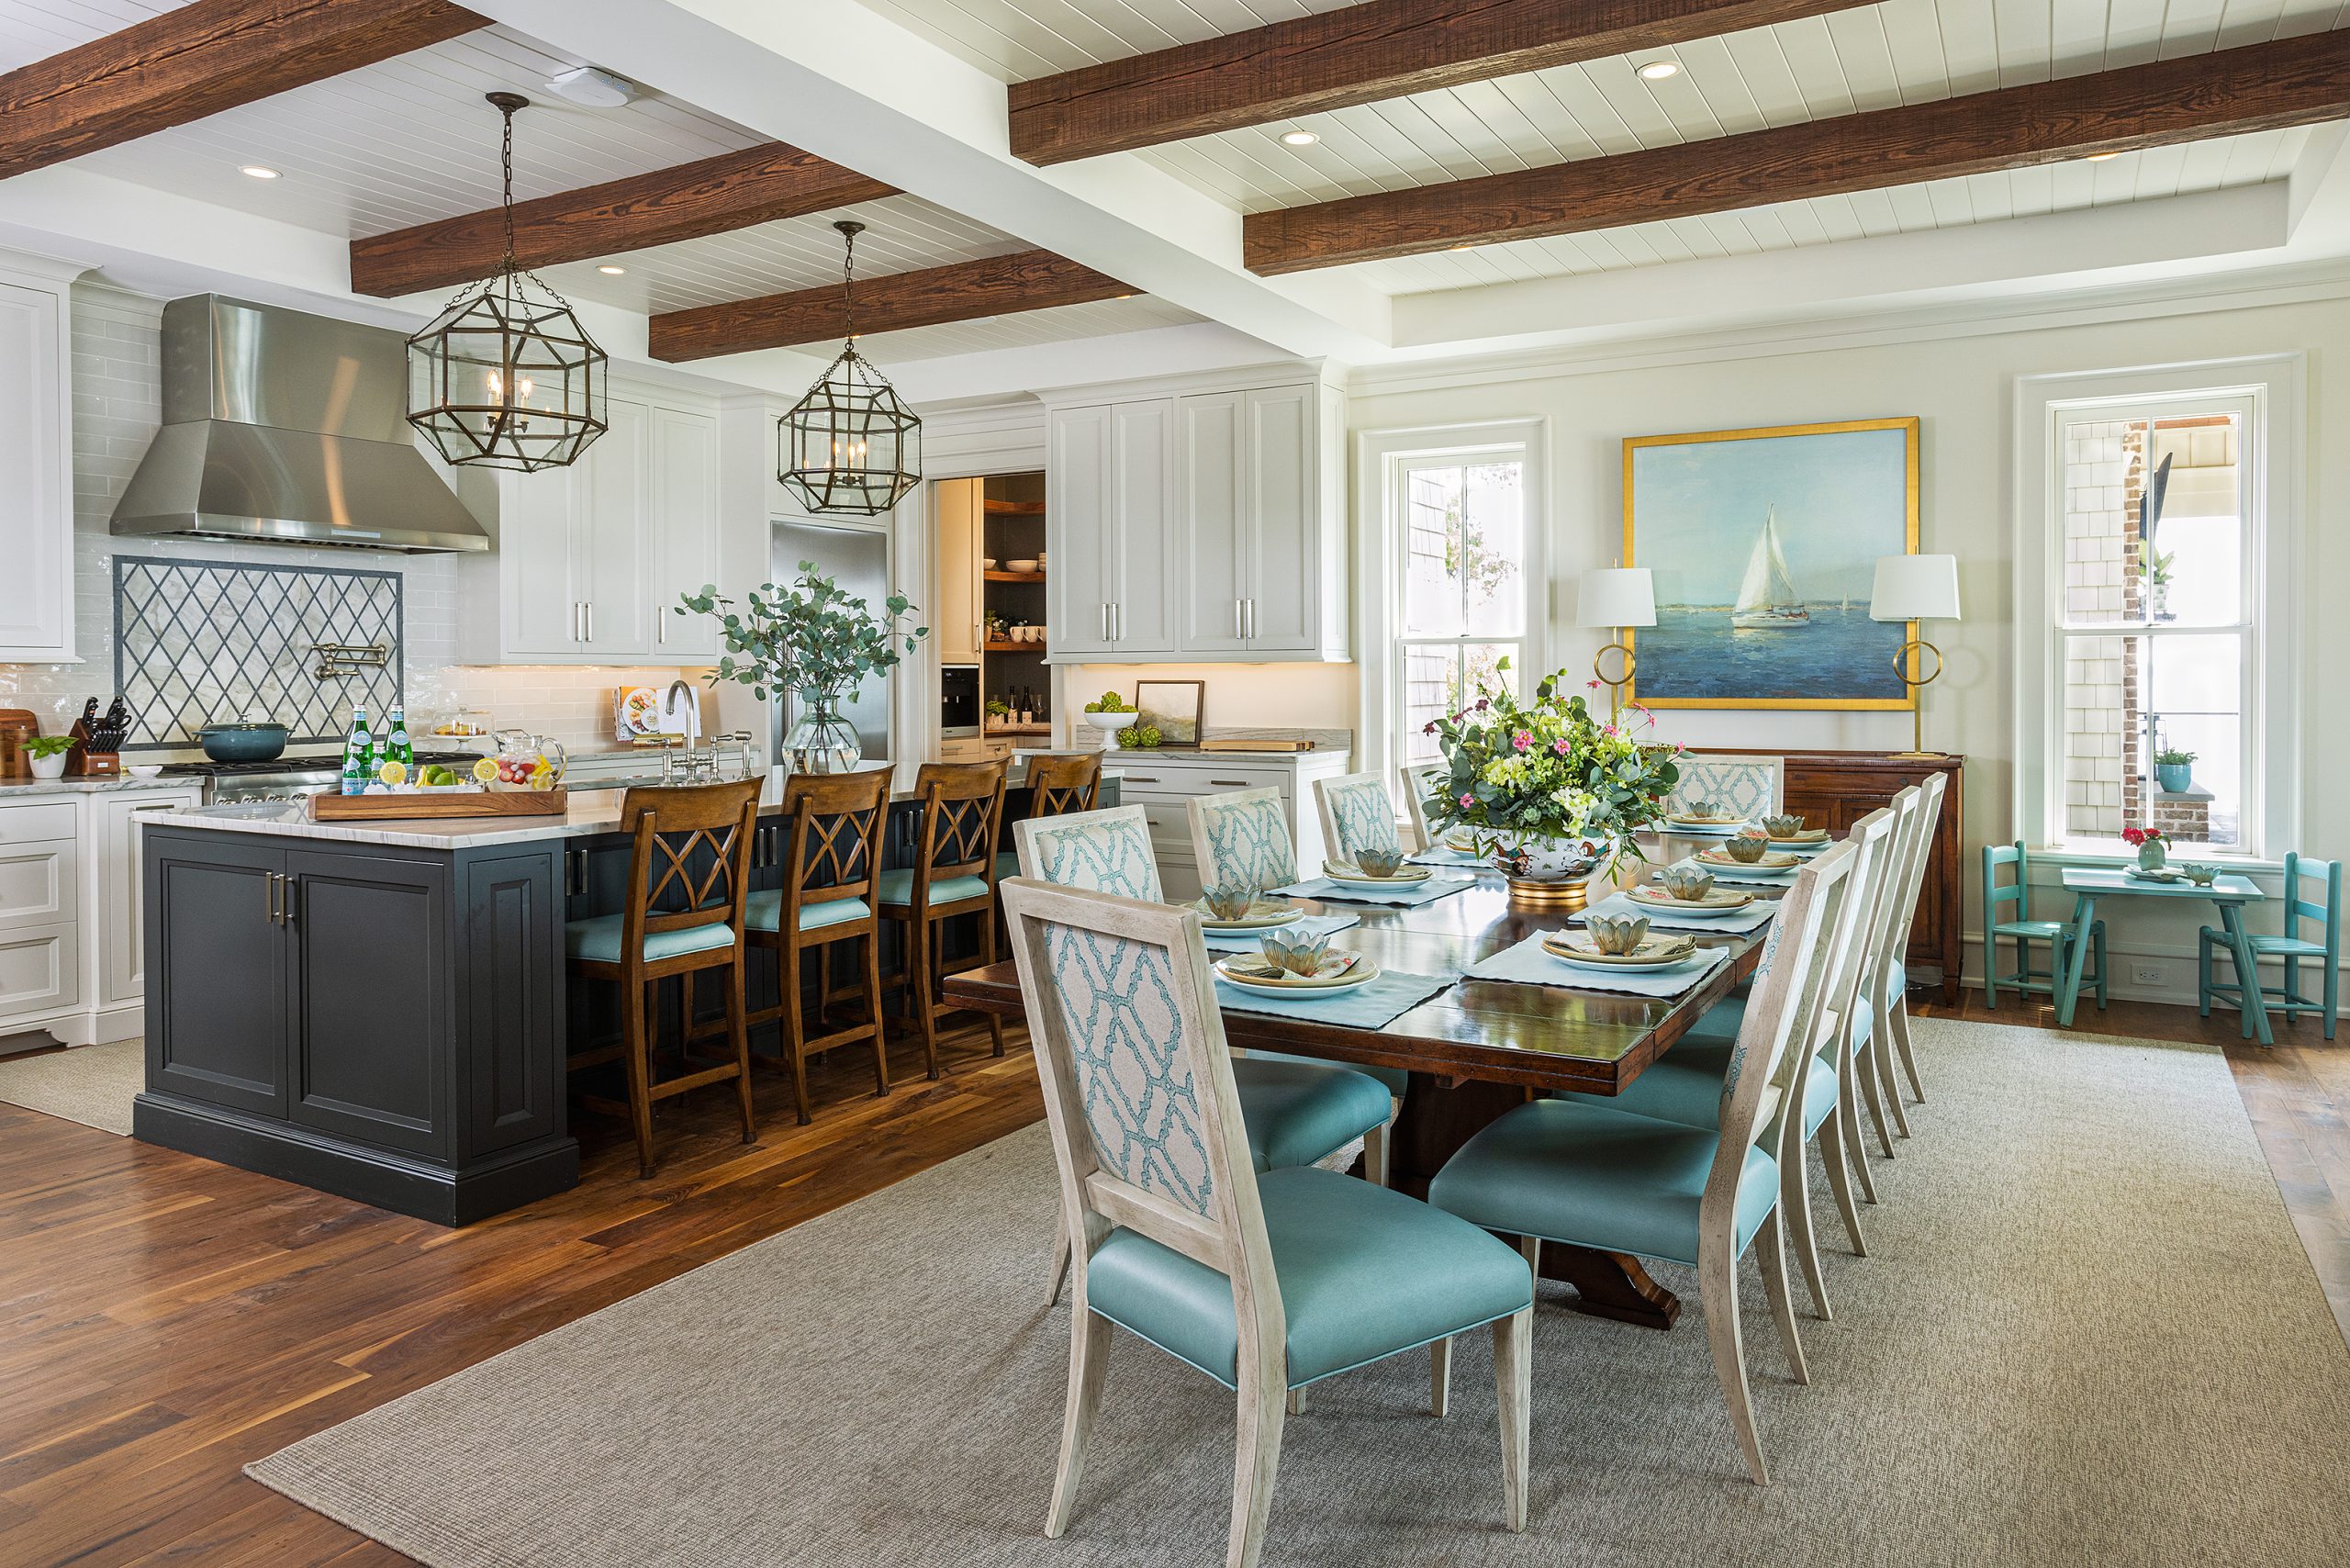 The combined kitchen and dining room is where the family spends most of their time. The aqua color palette throughout the home reflects the water. When Amy prepares food at her island, she has a magnificent view of the sunset. Flowers courtesy of Amy’s sister, Allison Plumblee. Home styled for photography by Sheila Andrade with Black Barn Home
